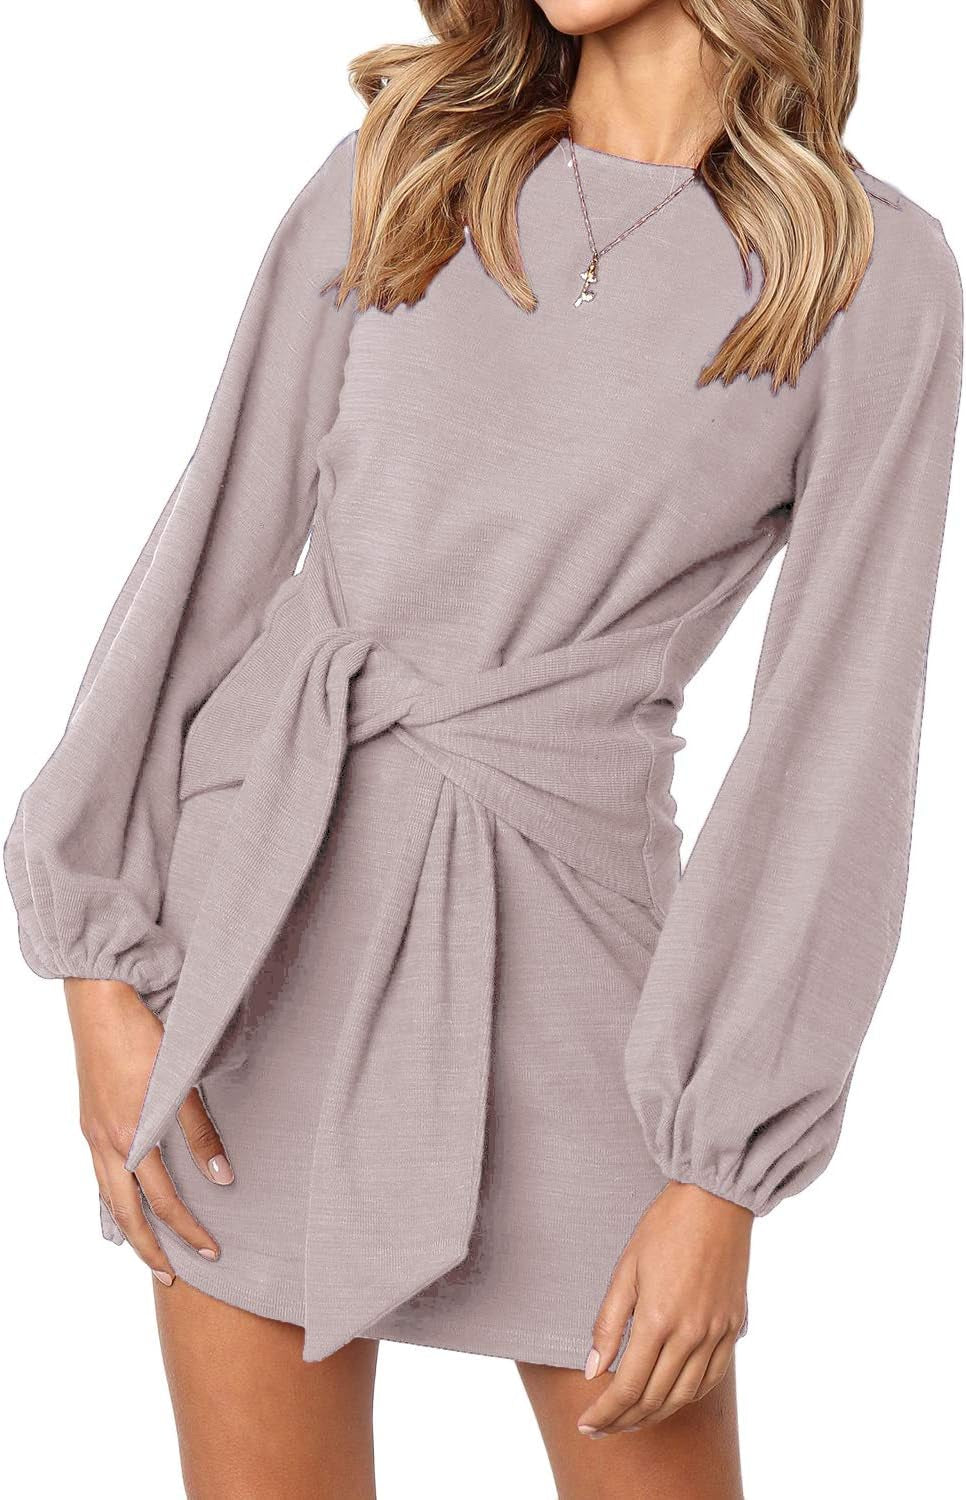 "Chic and Flattering Women'S Tie Waist Sweater Dress - Perfect for Casual or Cocktail Parties!"